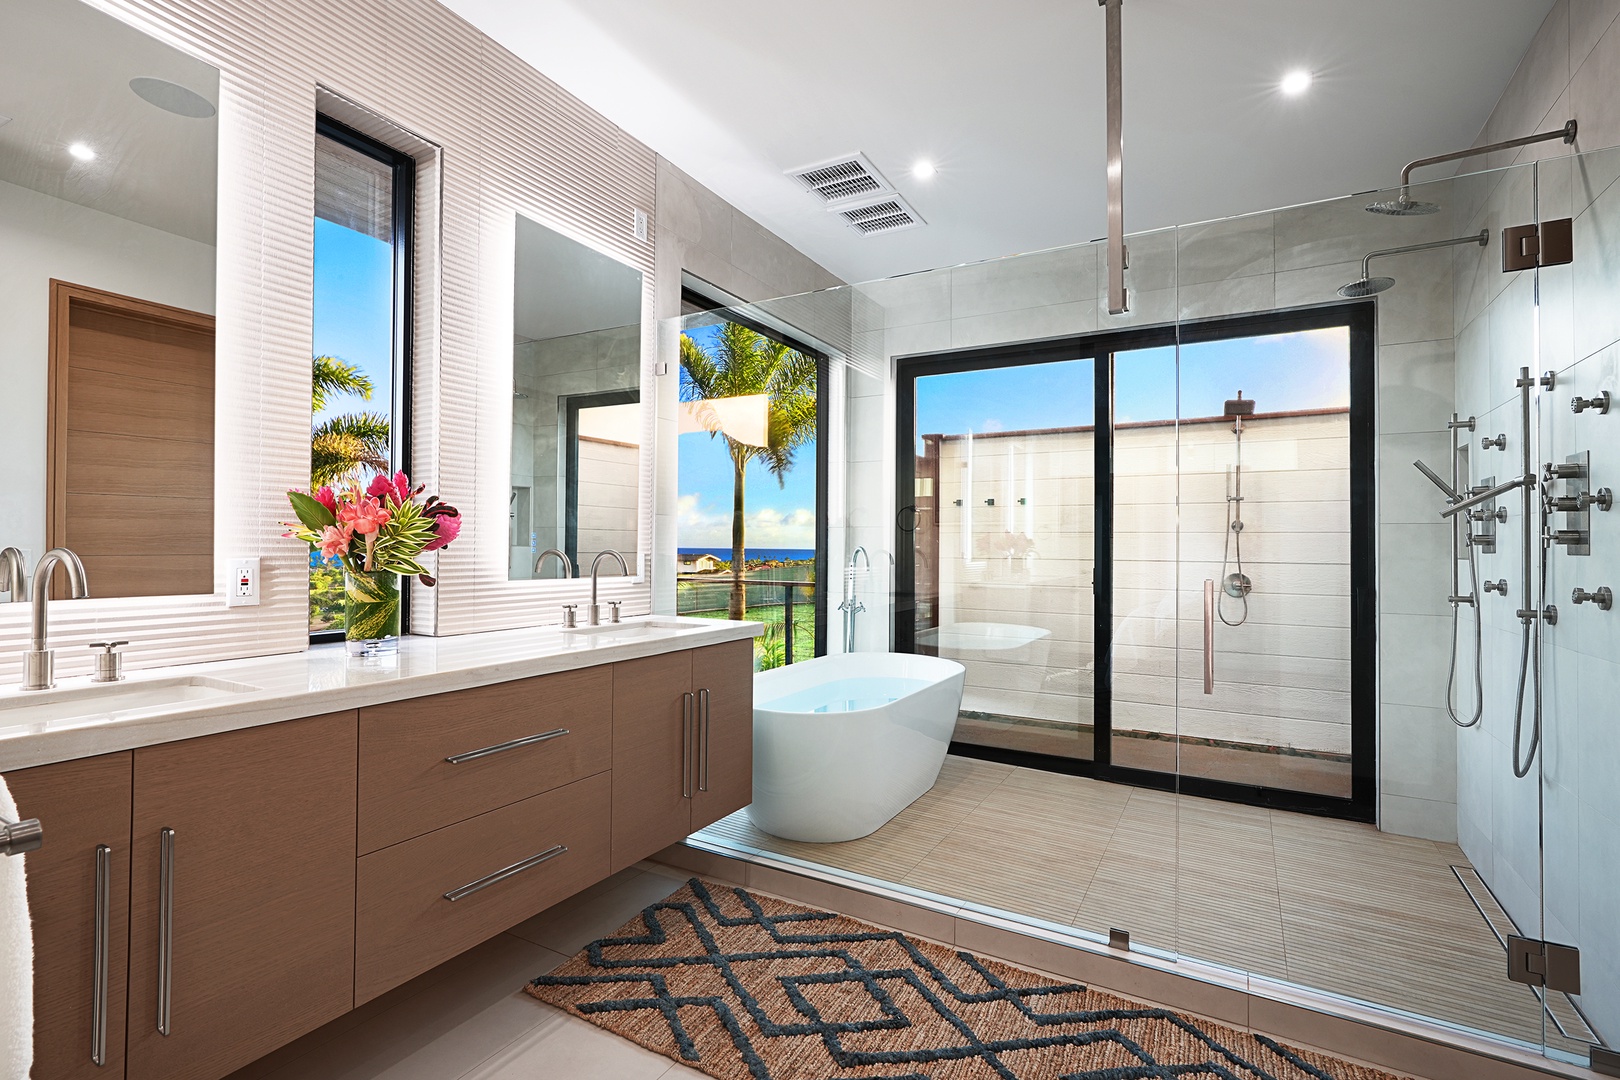 Koloa Vacation Rentals, Hale Keaka at Kukui'ula - Bask in the luxury of Ohana guest bedroom ensuite, featuring a freestanding tub and a rain shower, with tropical views that turn every moment into a spa-like experience.